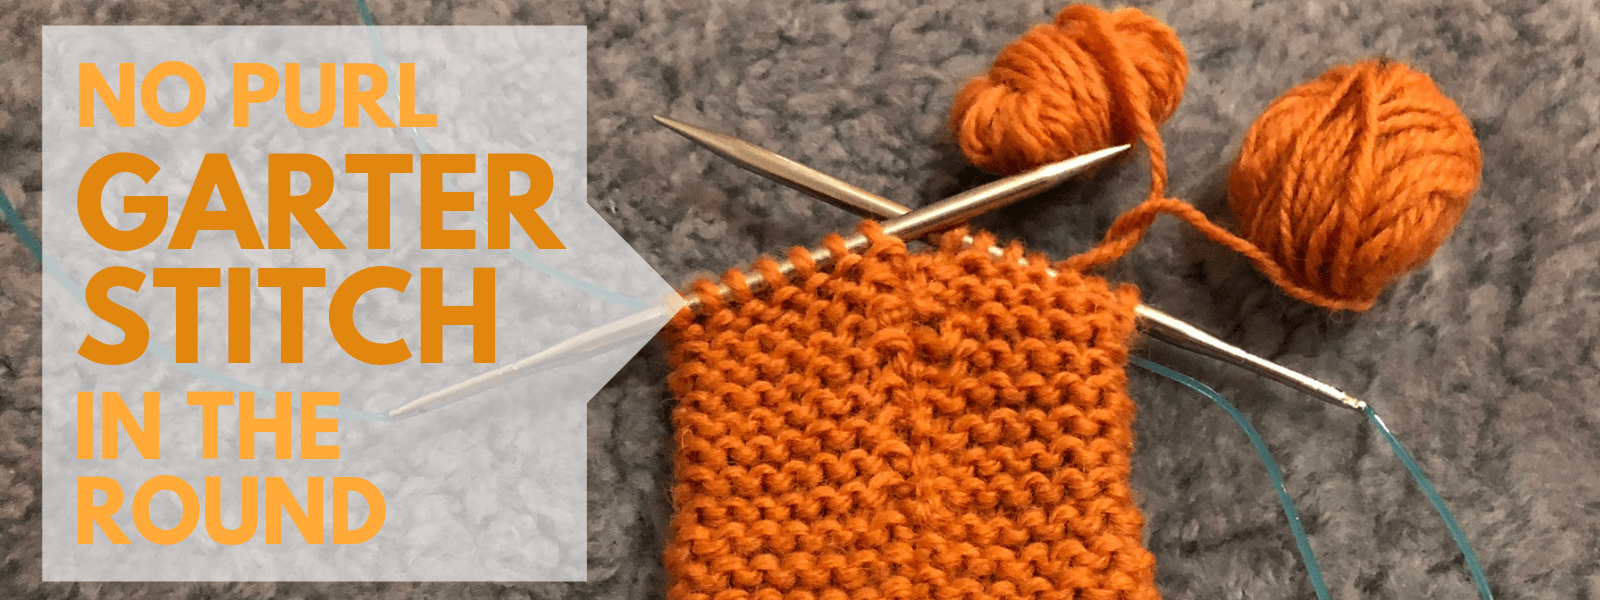 Don't Be Such a Square | Learn how to knit circular garter stitch without purl stitches | Ho to do a no purl garter stitch in the round | Two strand garter stitch